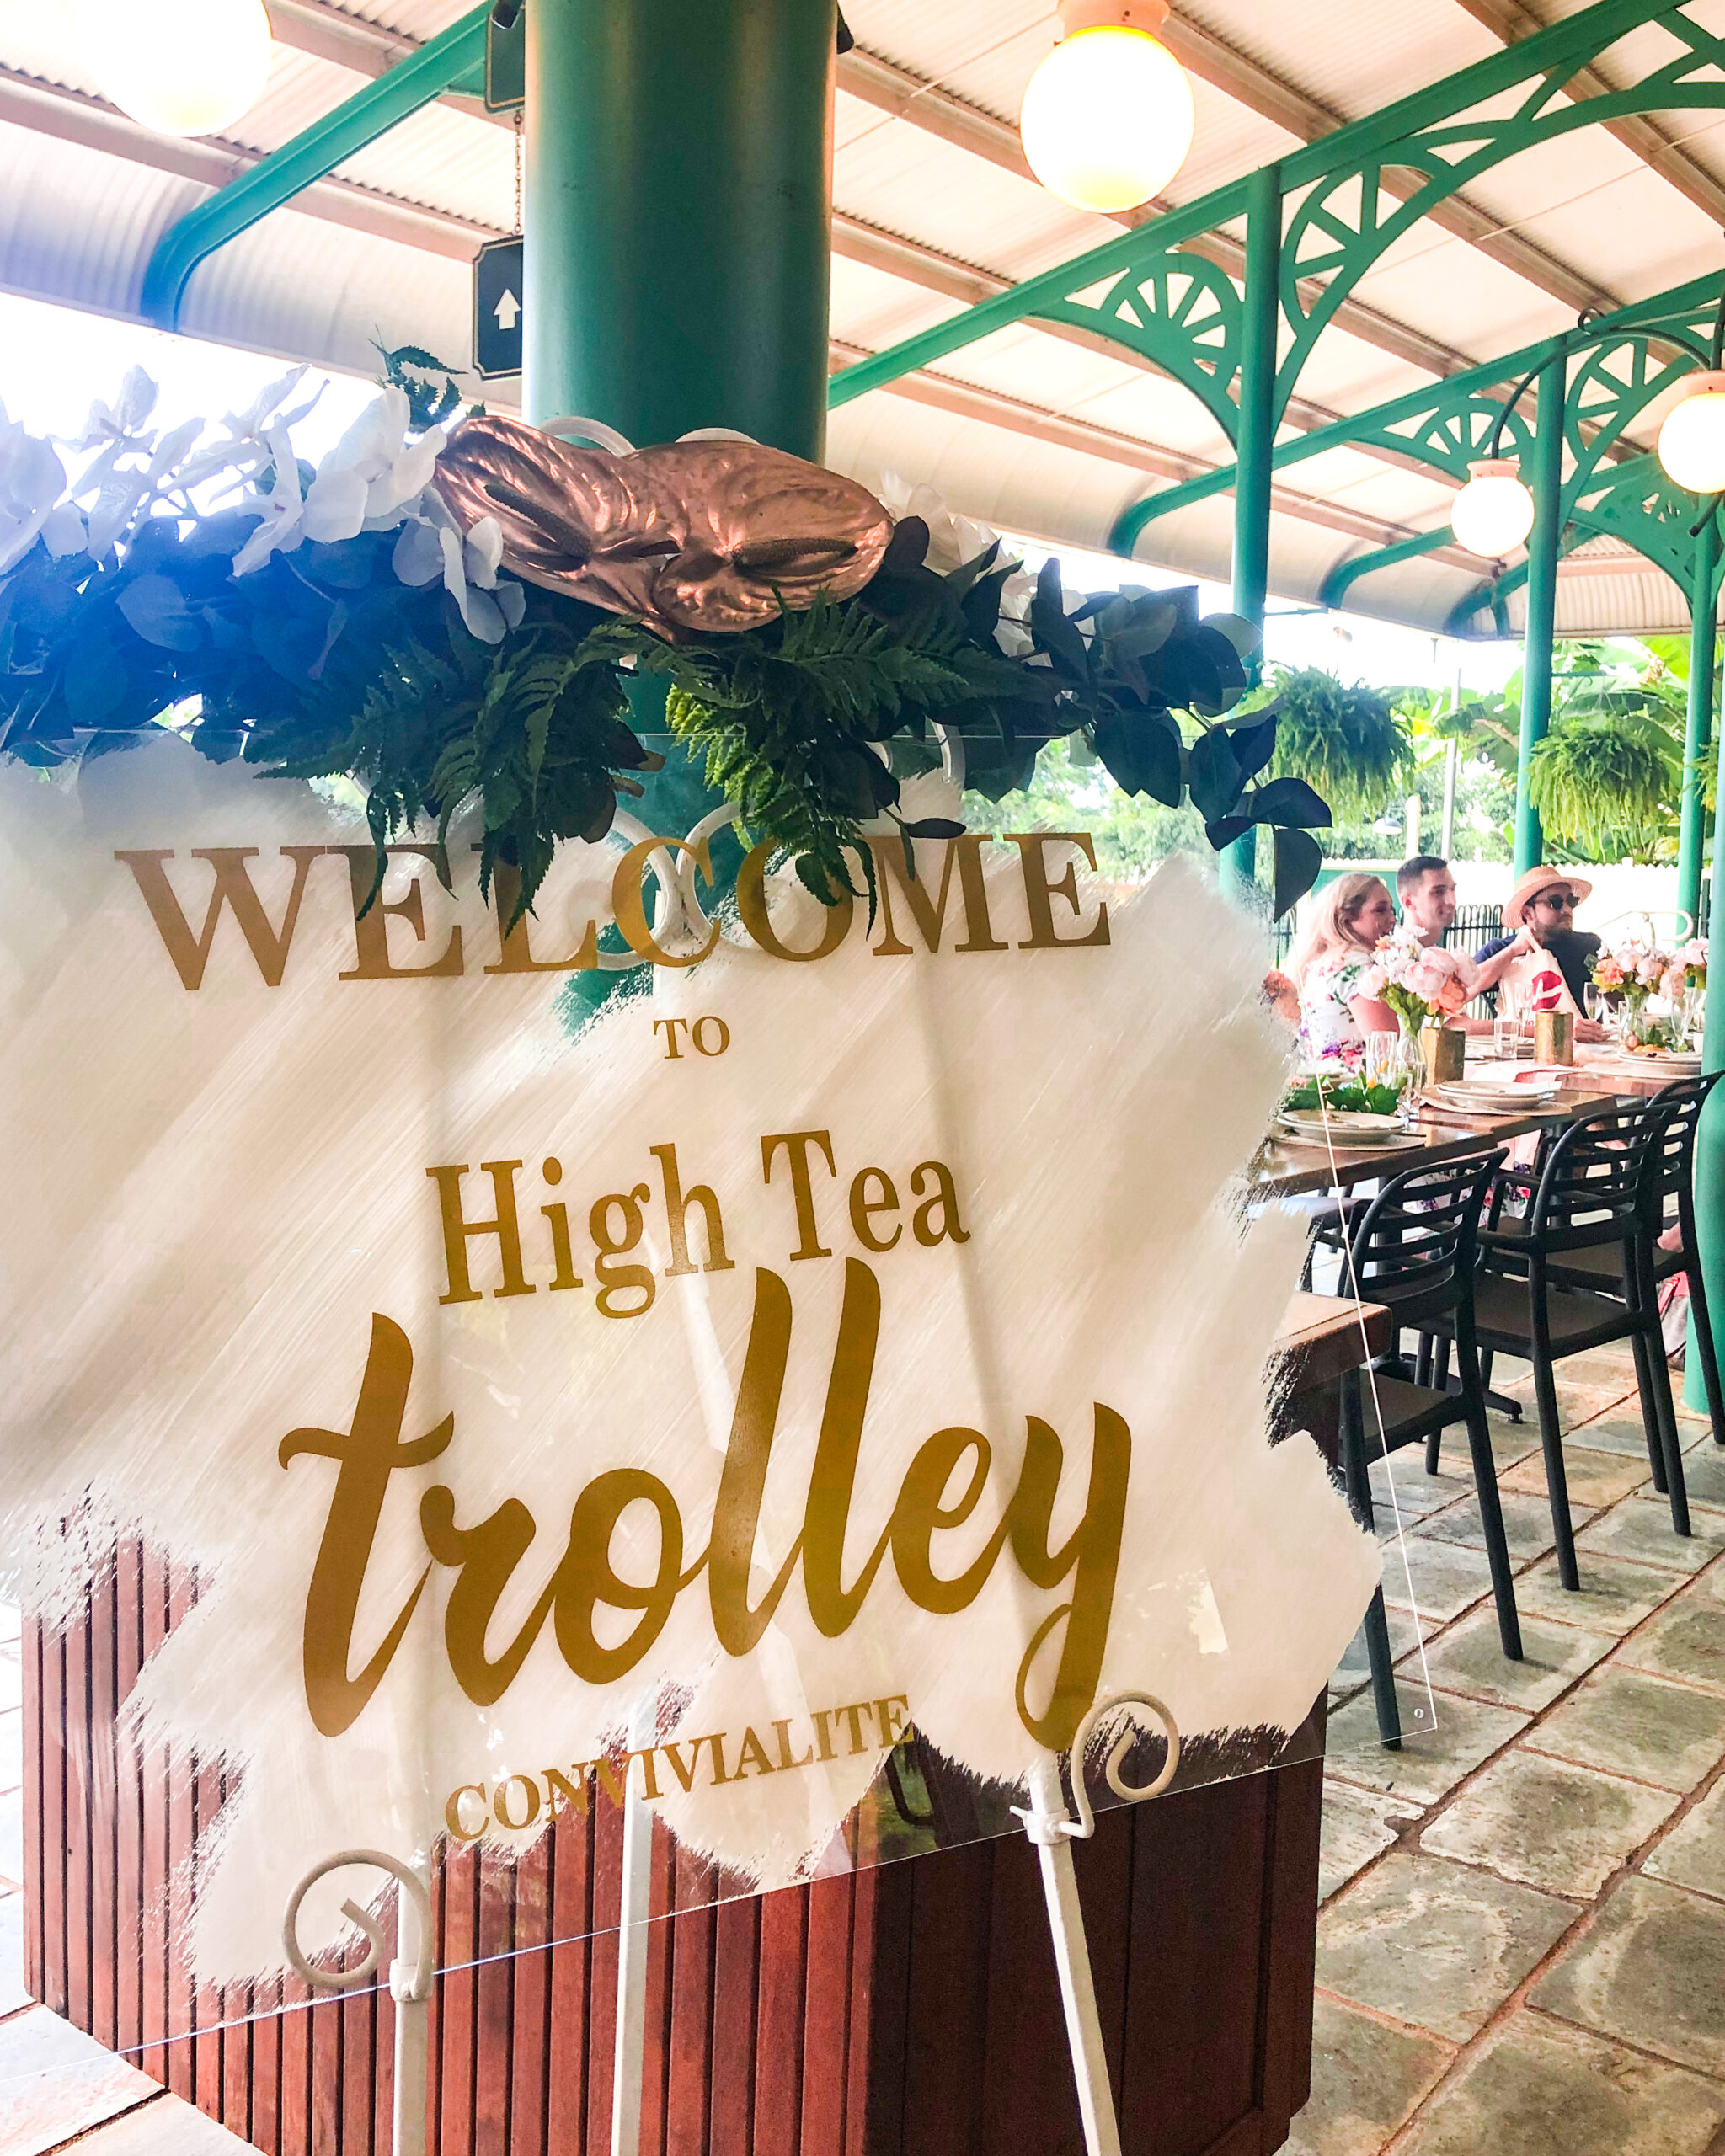 Welcome to High Tea Trolley sign